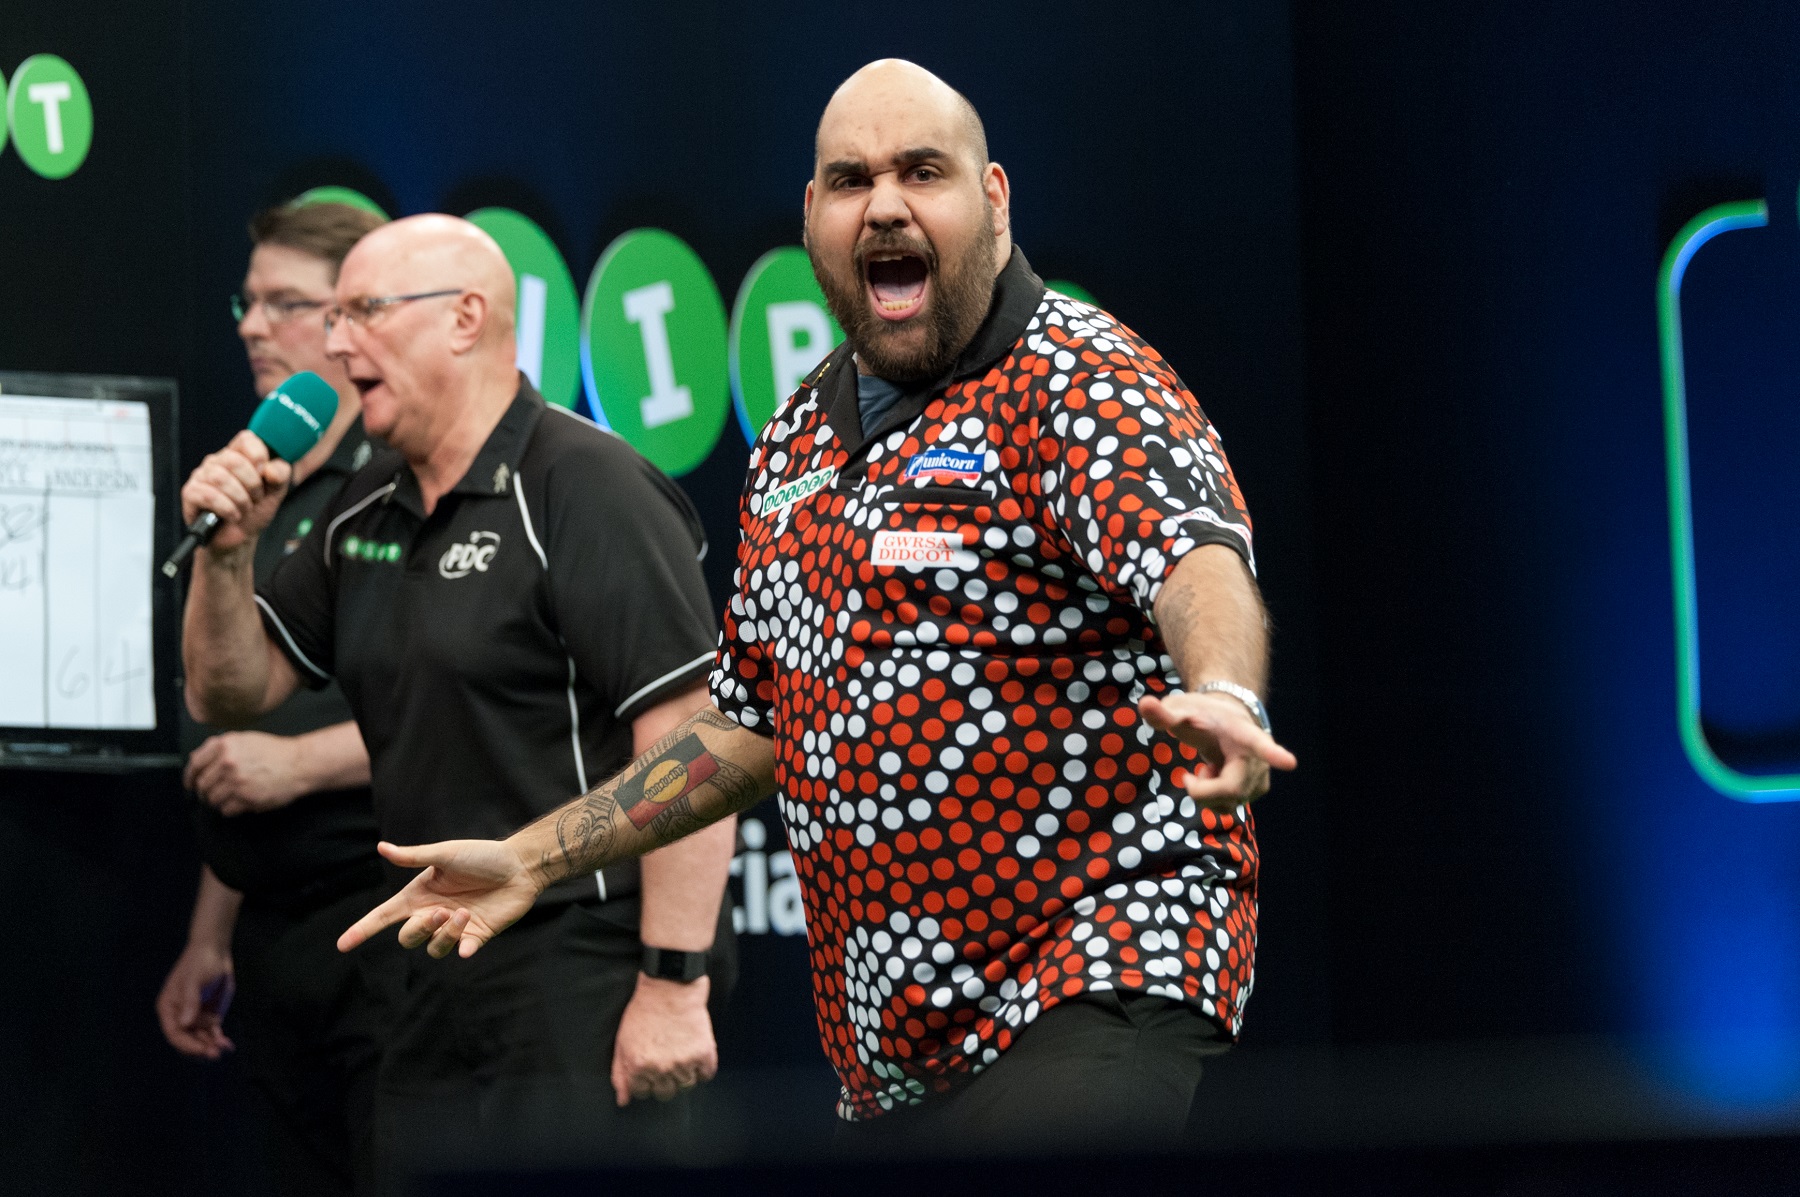 Kyle Anderson talks about his 9-dart finish